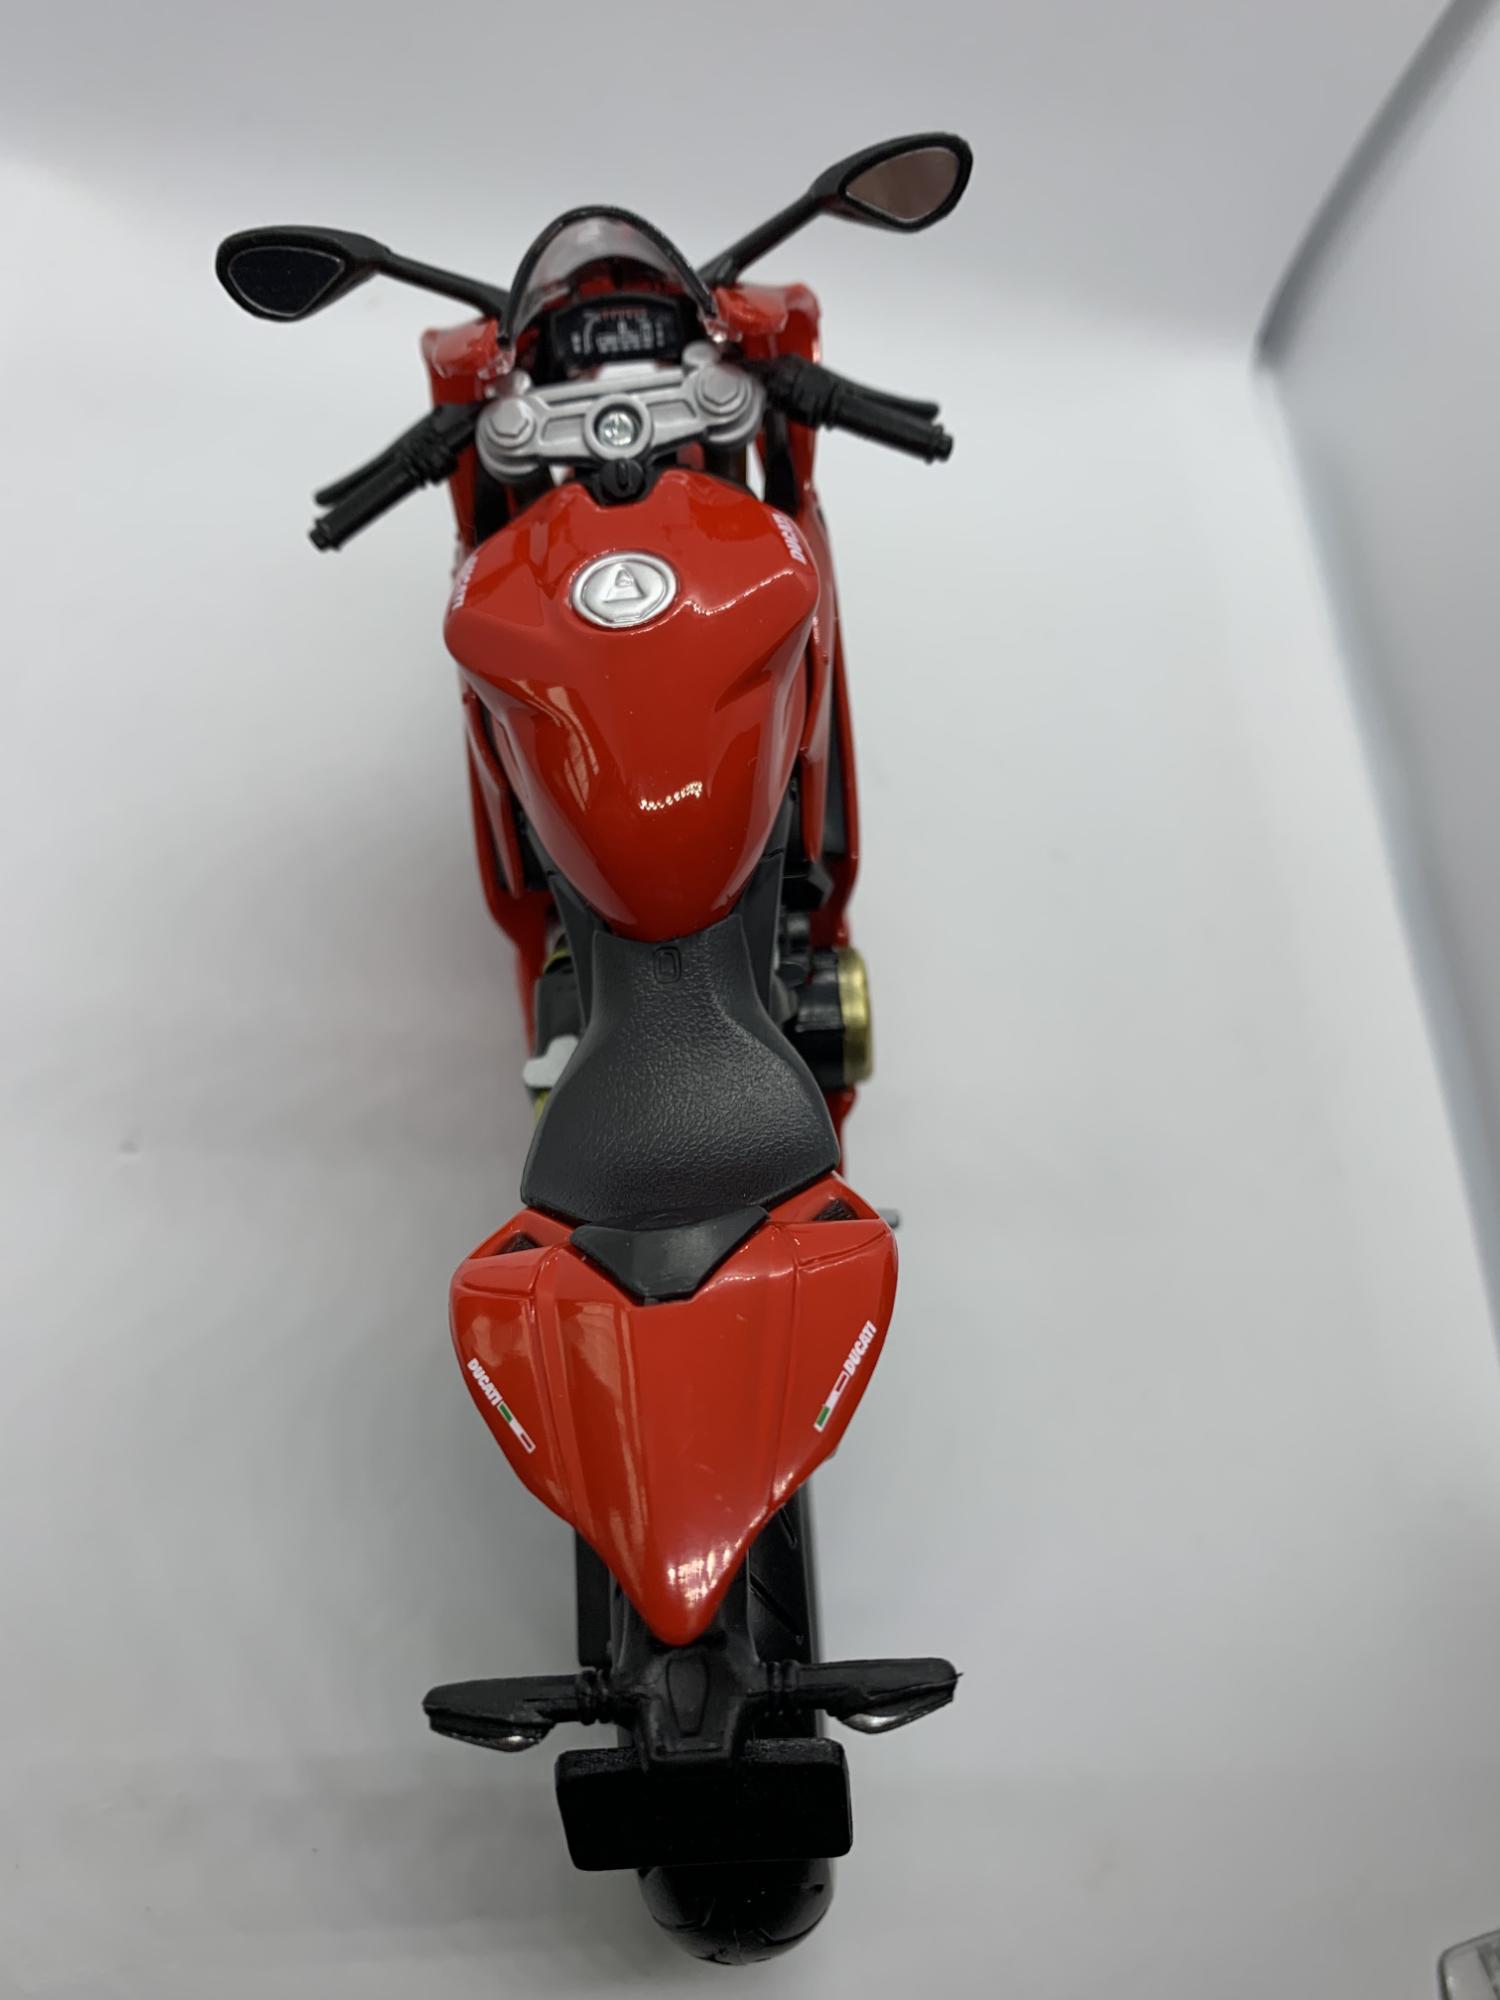 A good scale model of a Ducati 1199 Panigale from 2012 decorated in red with authentic graphics